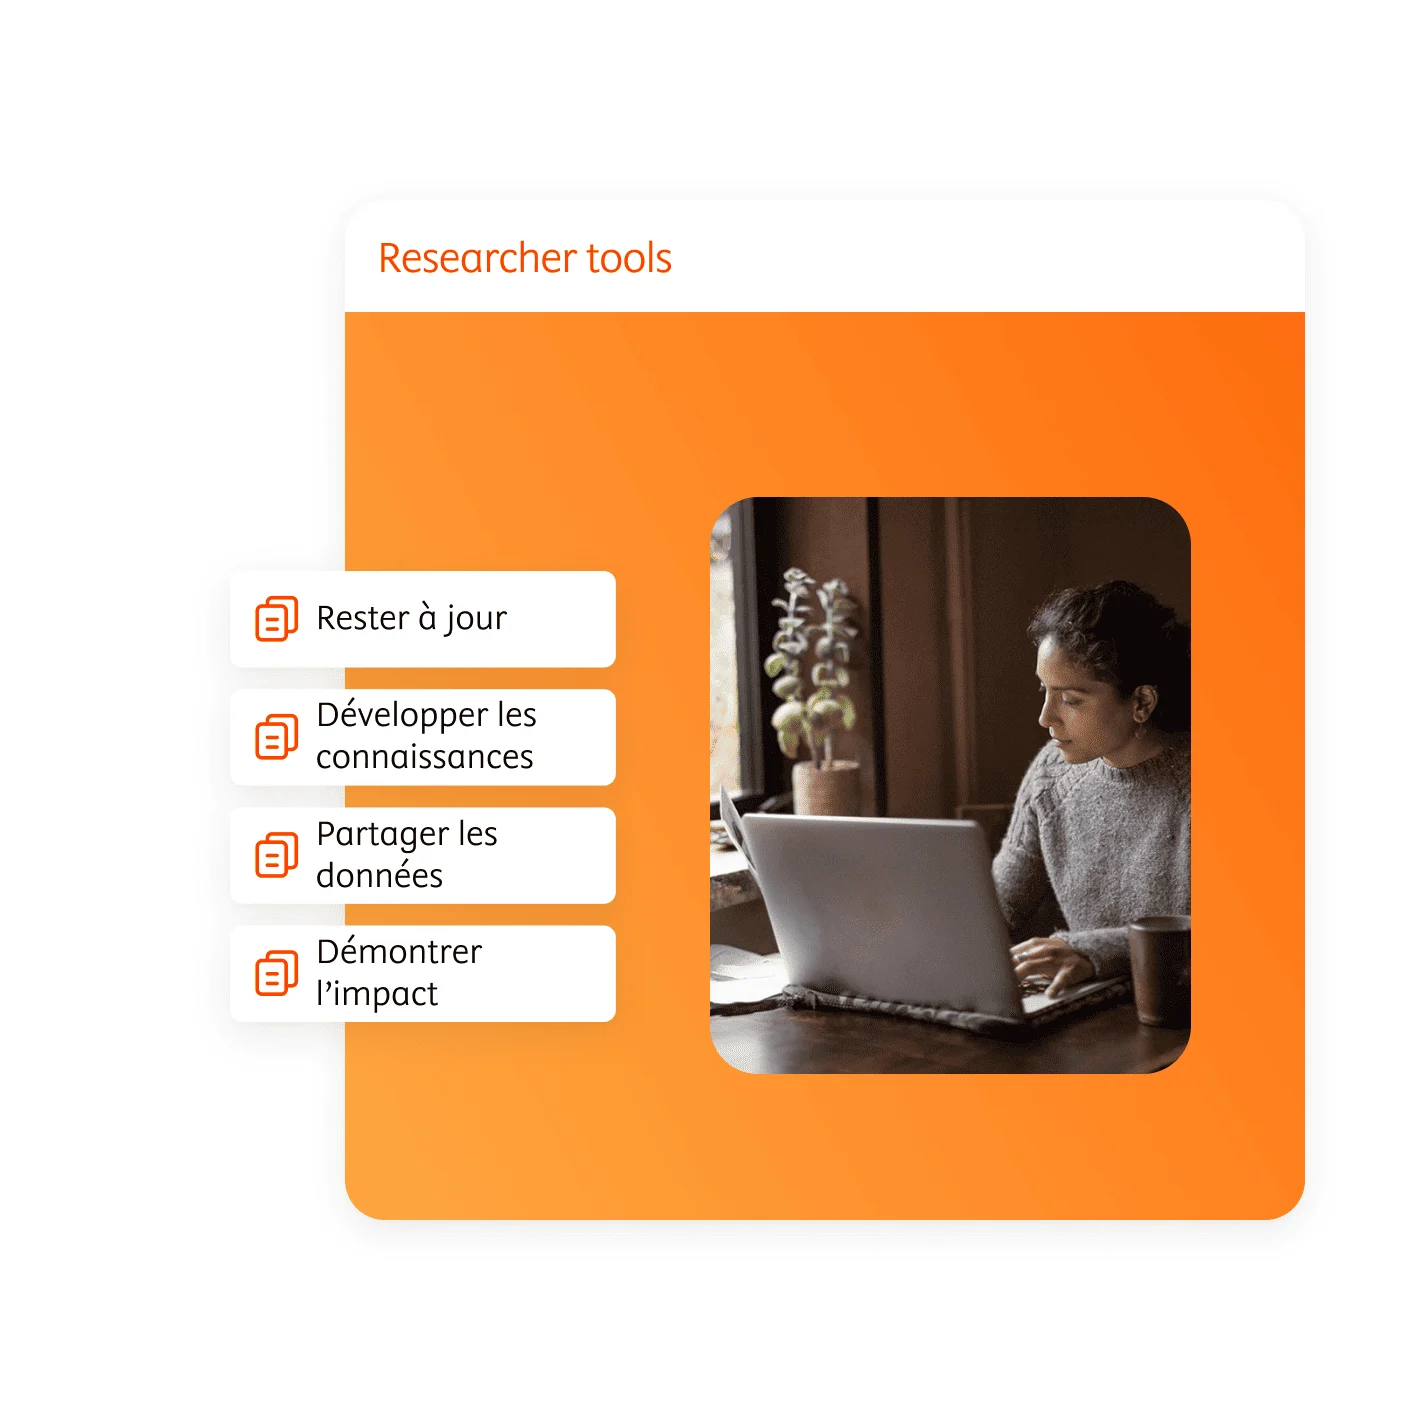 Researcher tools use cases